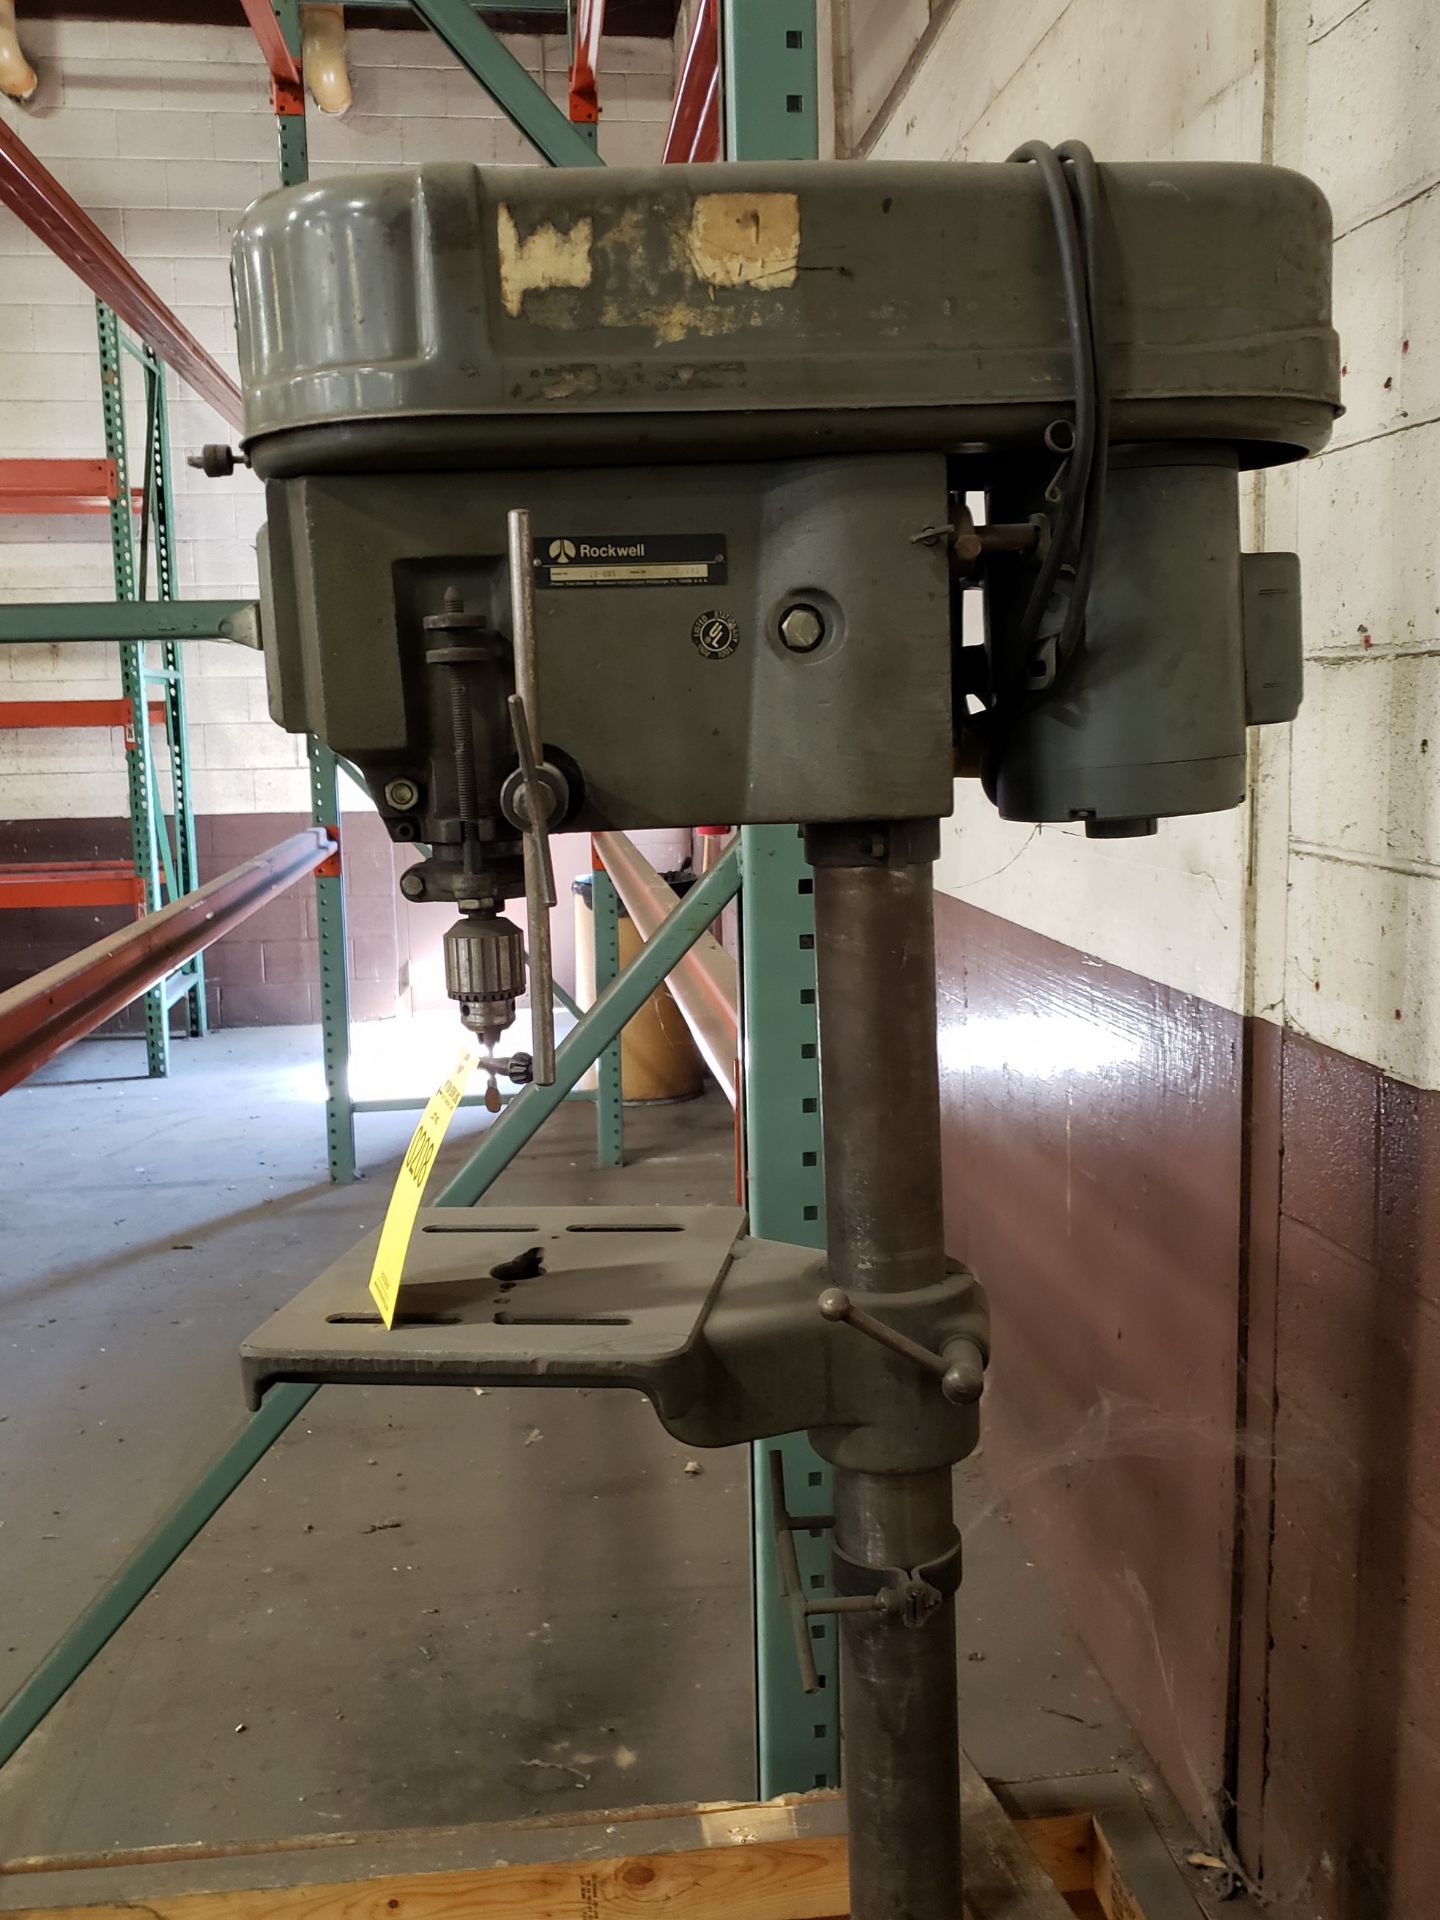 ROCKWELL PEDESTAL DRILL PRESS 4-SPEED, 120V, SERIES NO. 15-081, S/N 1683995 - Image 4 of 4